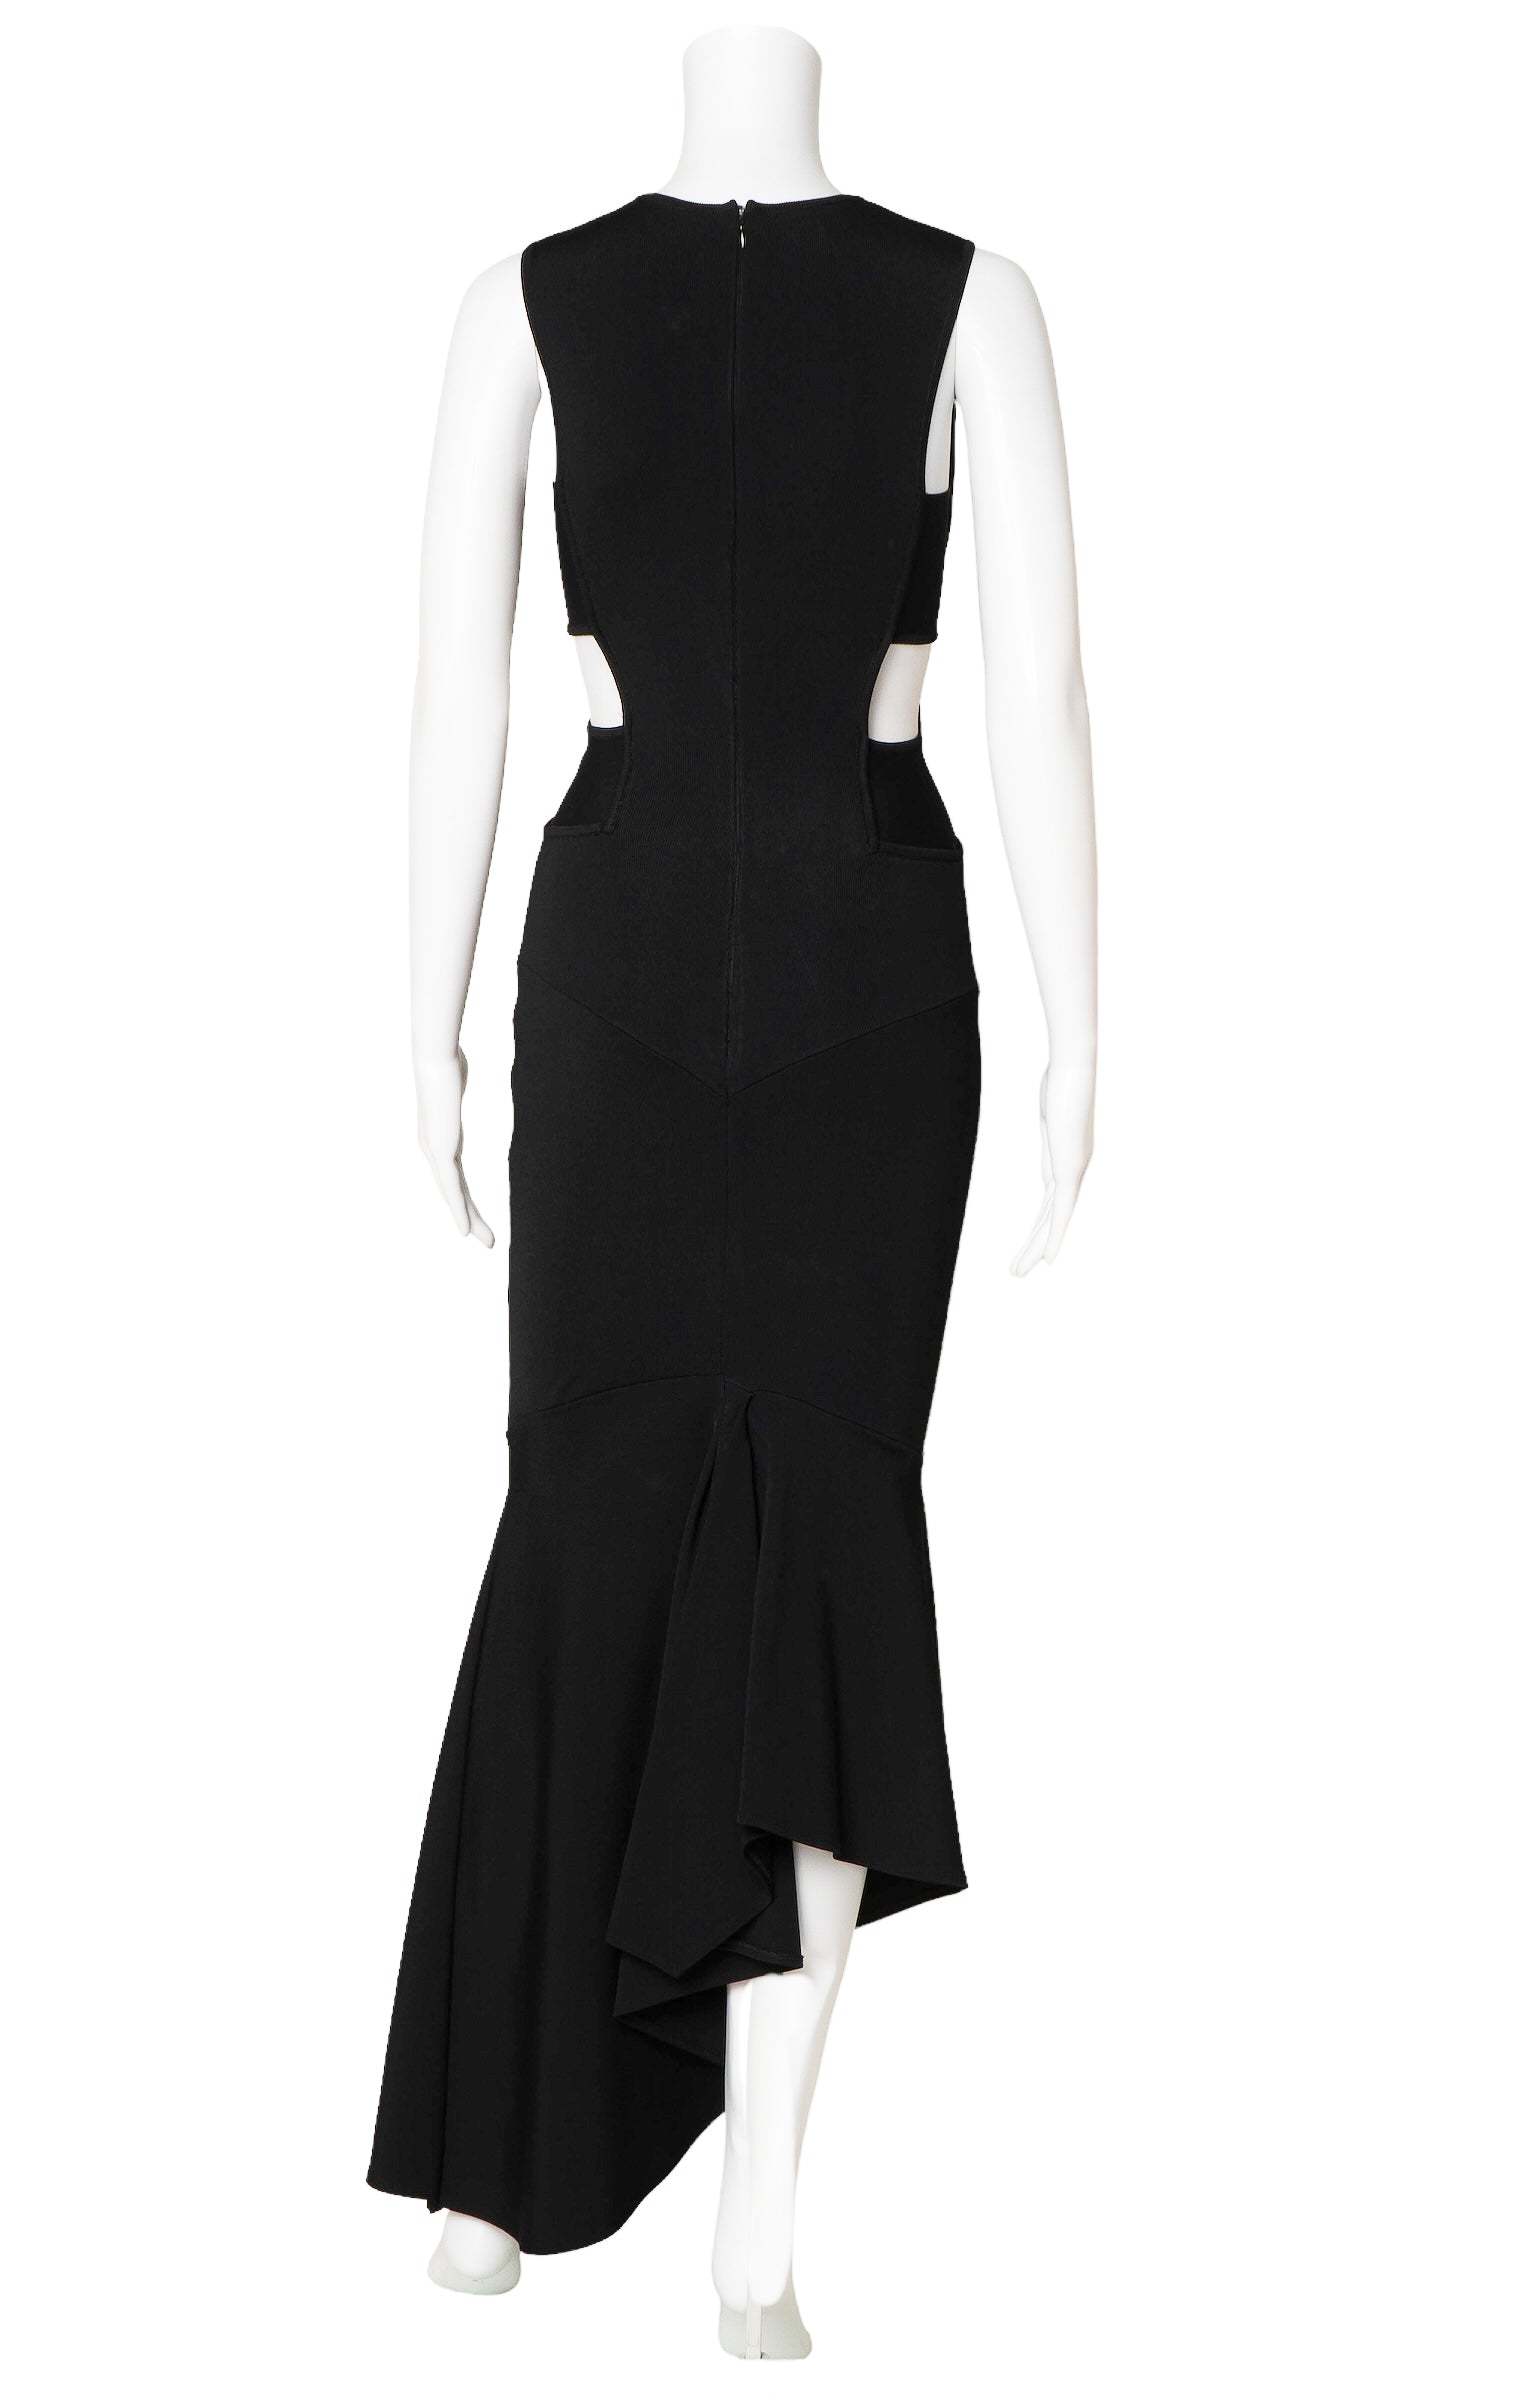 ALEXANDRE VAUTHIER (RARE) Dress  Size: FR 38 / Comparable to US 4-6